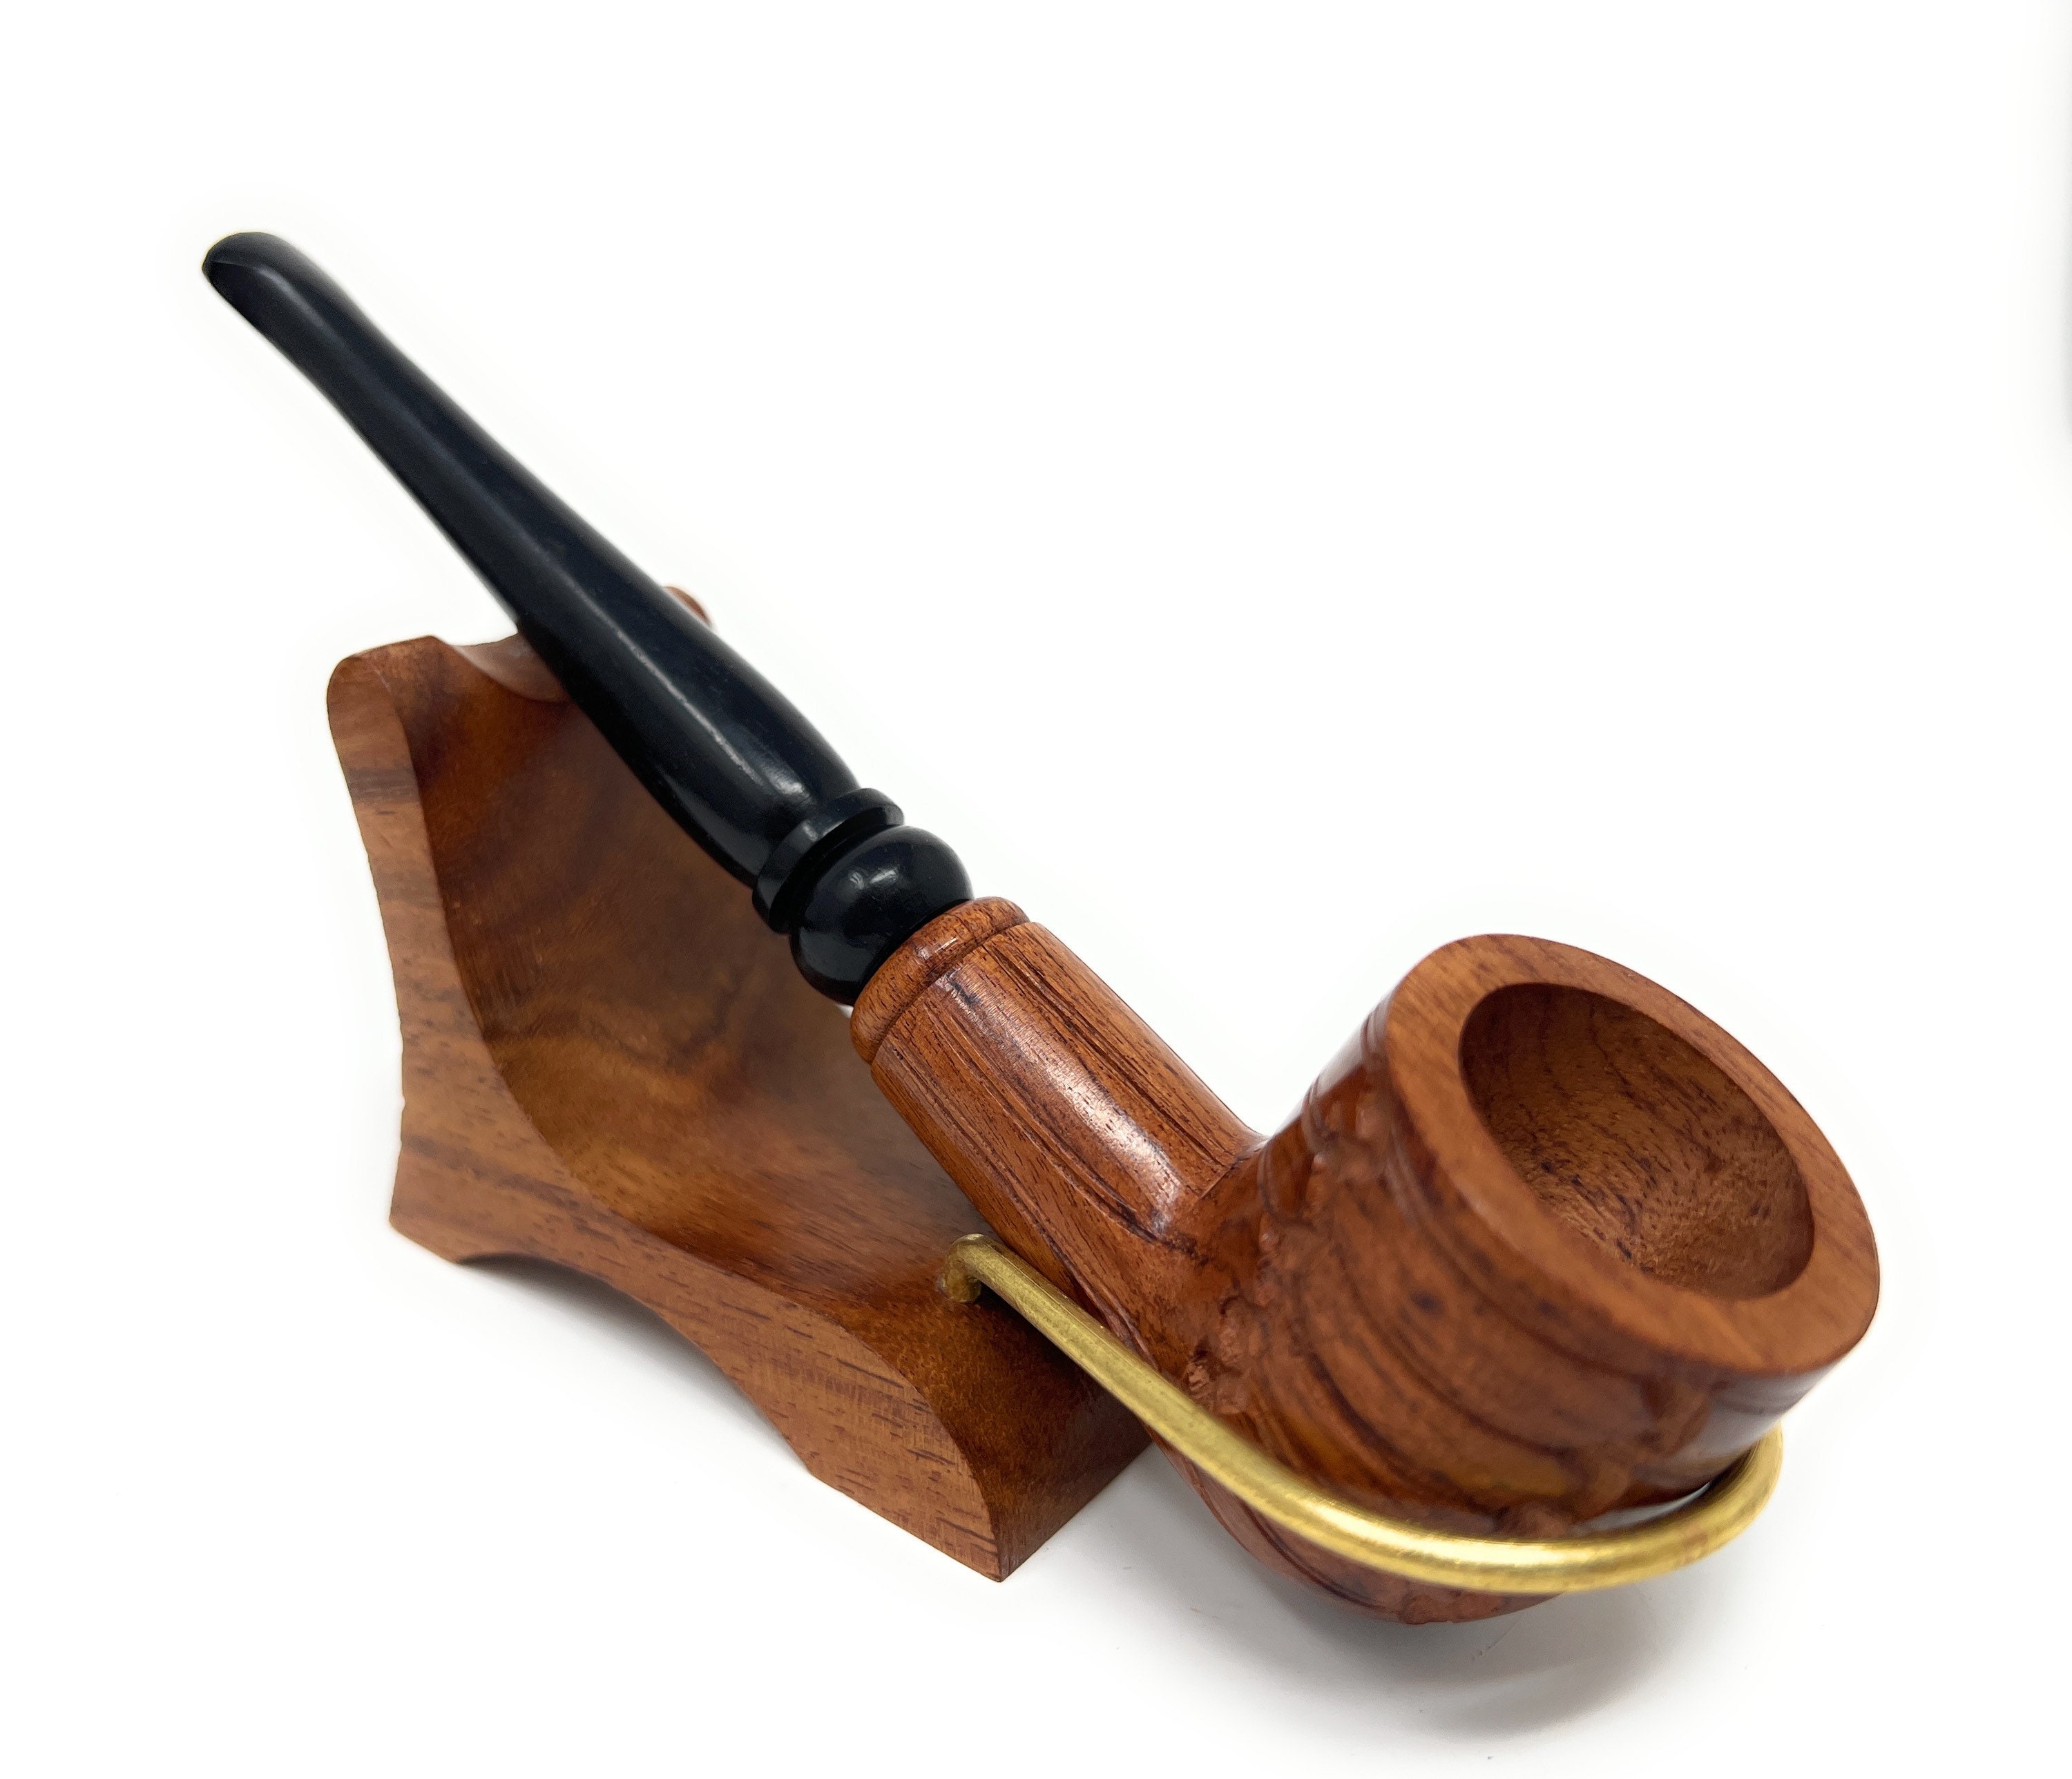 I made this experimental tobacco pipe out of Olive Wood in epoxy resin. Any  tips on how to polish it to make it more clear? : r/woodworking